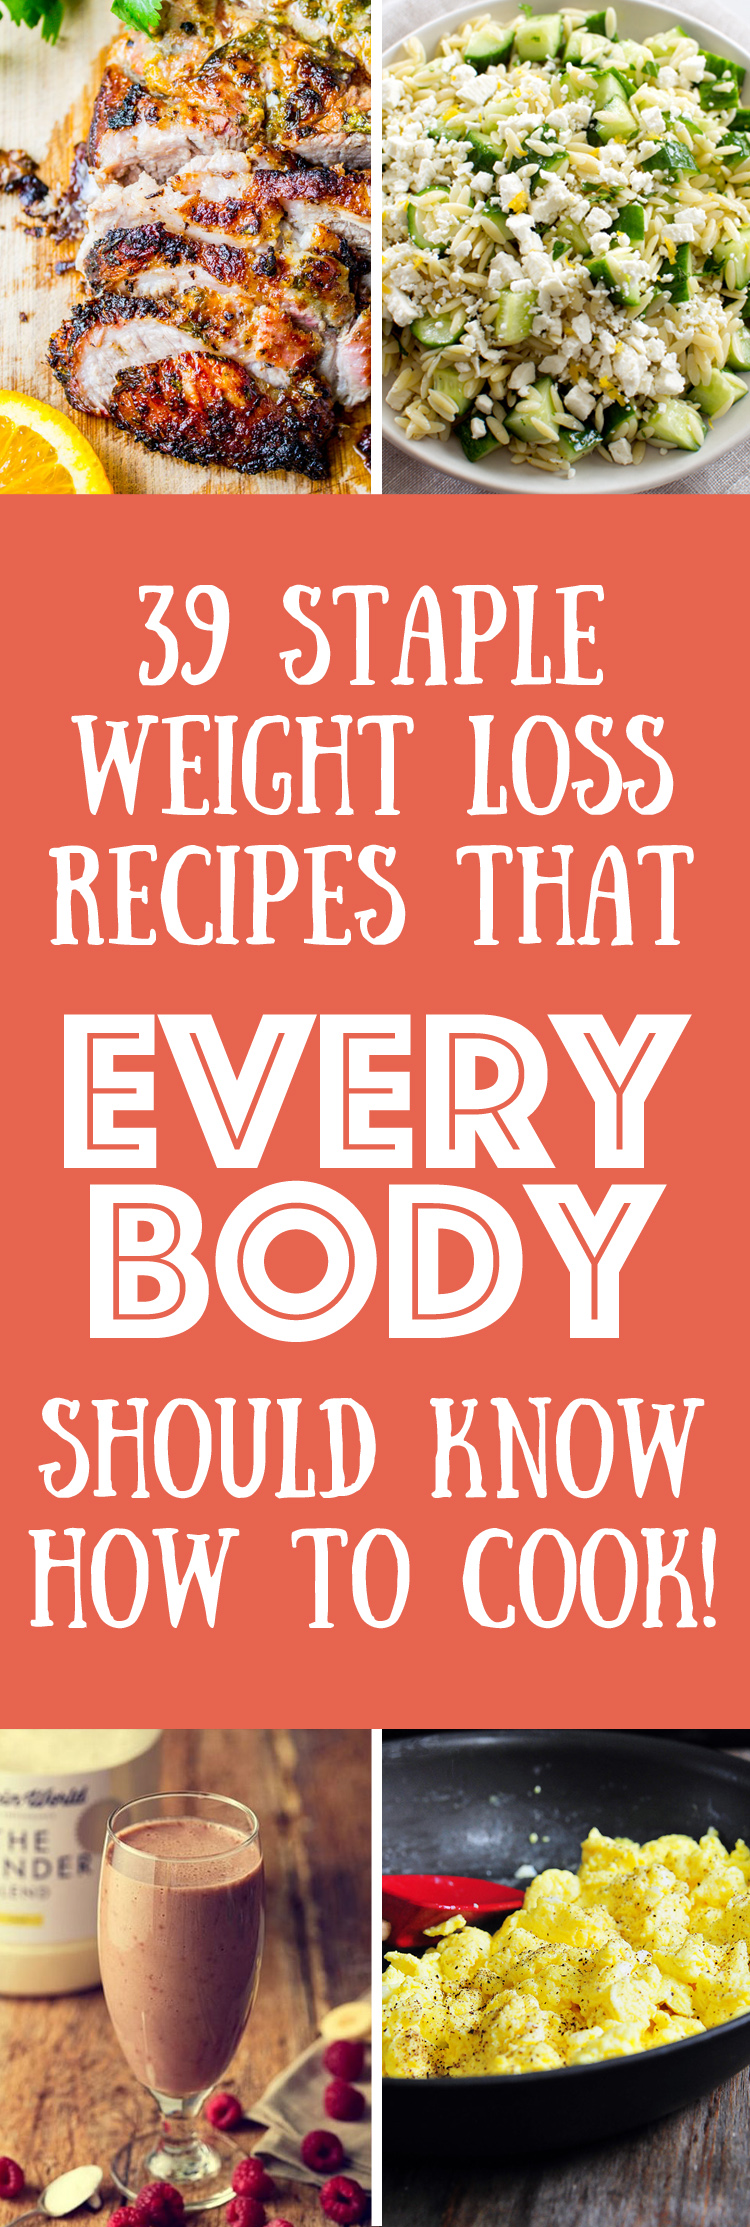 39-weight-loss-recipes-you-should-to-know